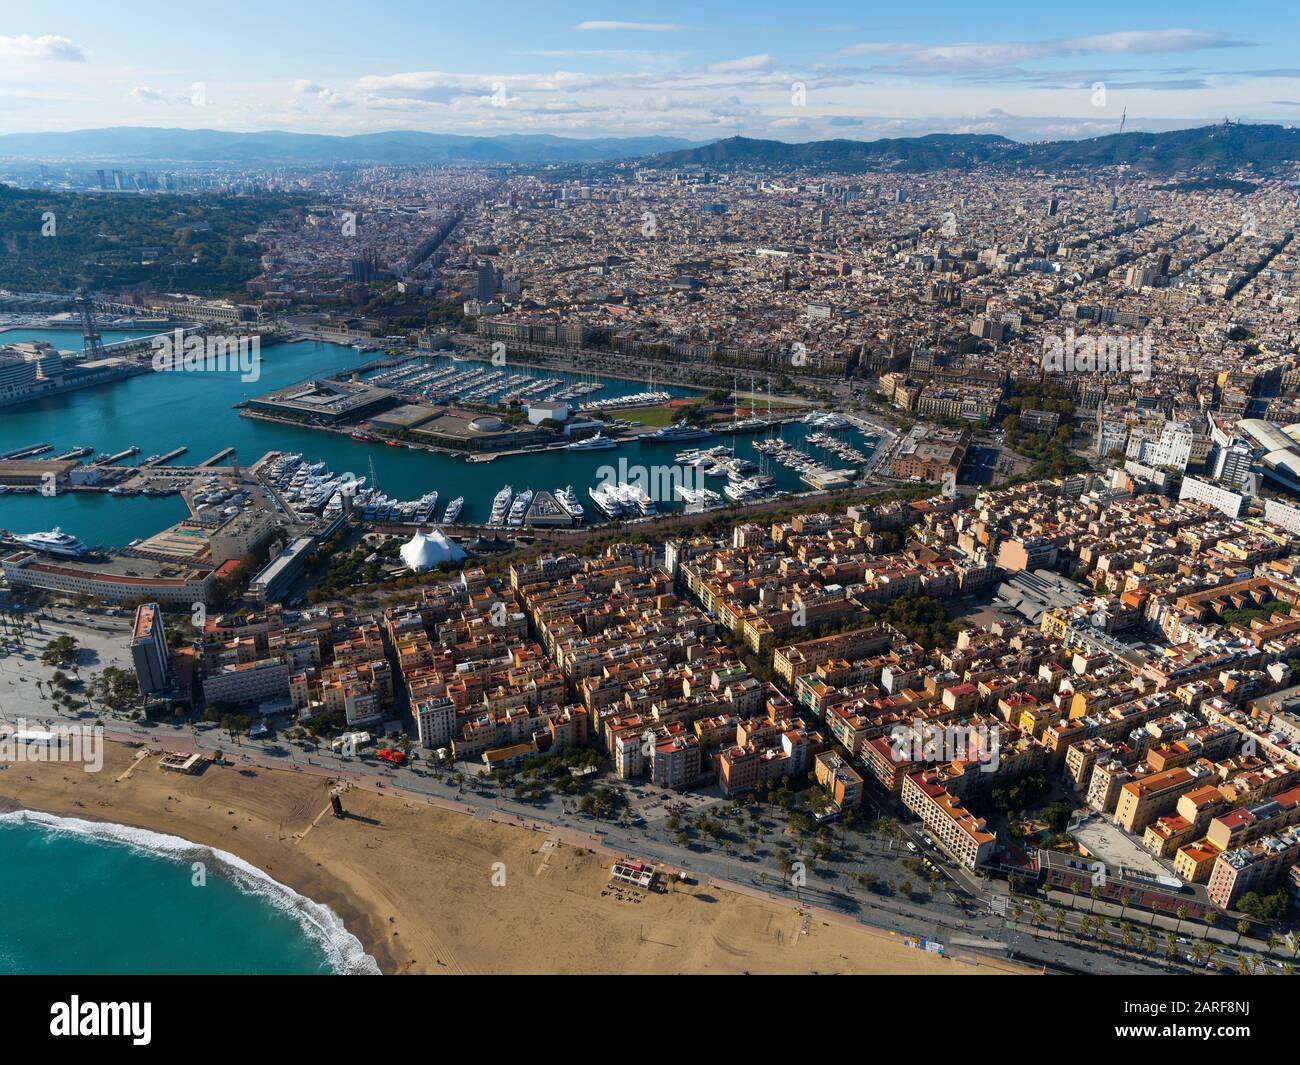 Aerial view of Barcelona with La Barceloneta neighborhoud and recereation port. Stock Photo